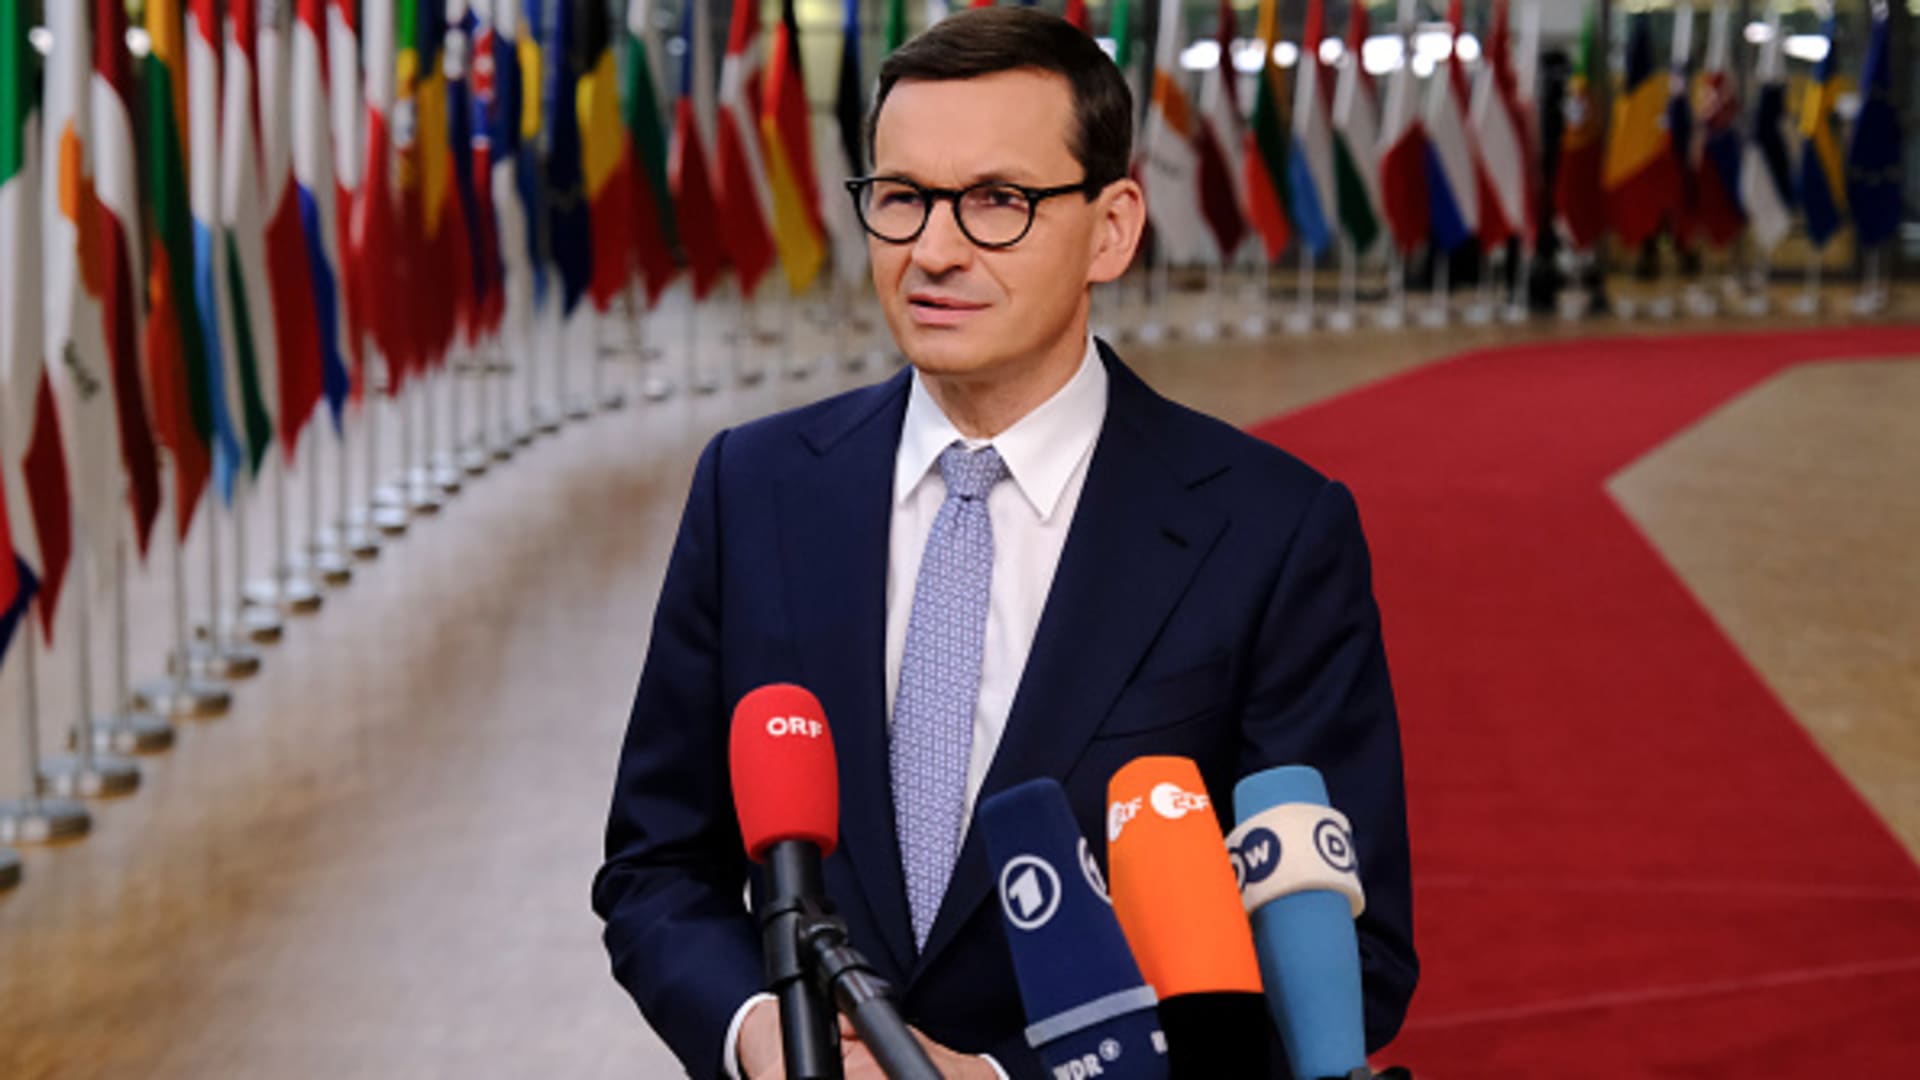 BRUSSELS, BELGIUM - OCTOBER 21: Poland's Prime Minister Mateusz Morawiecki speaks to media as he attends the EU Leaders' Summit on October 21, 2021 in Brussels, Belgium.